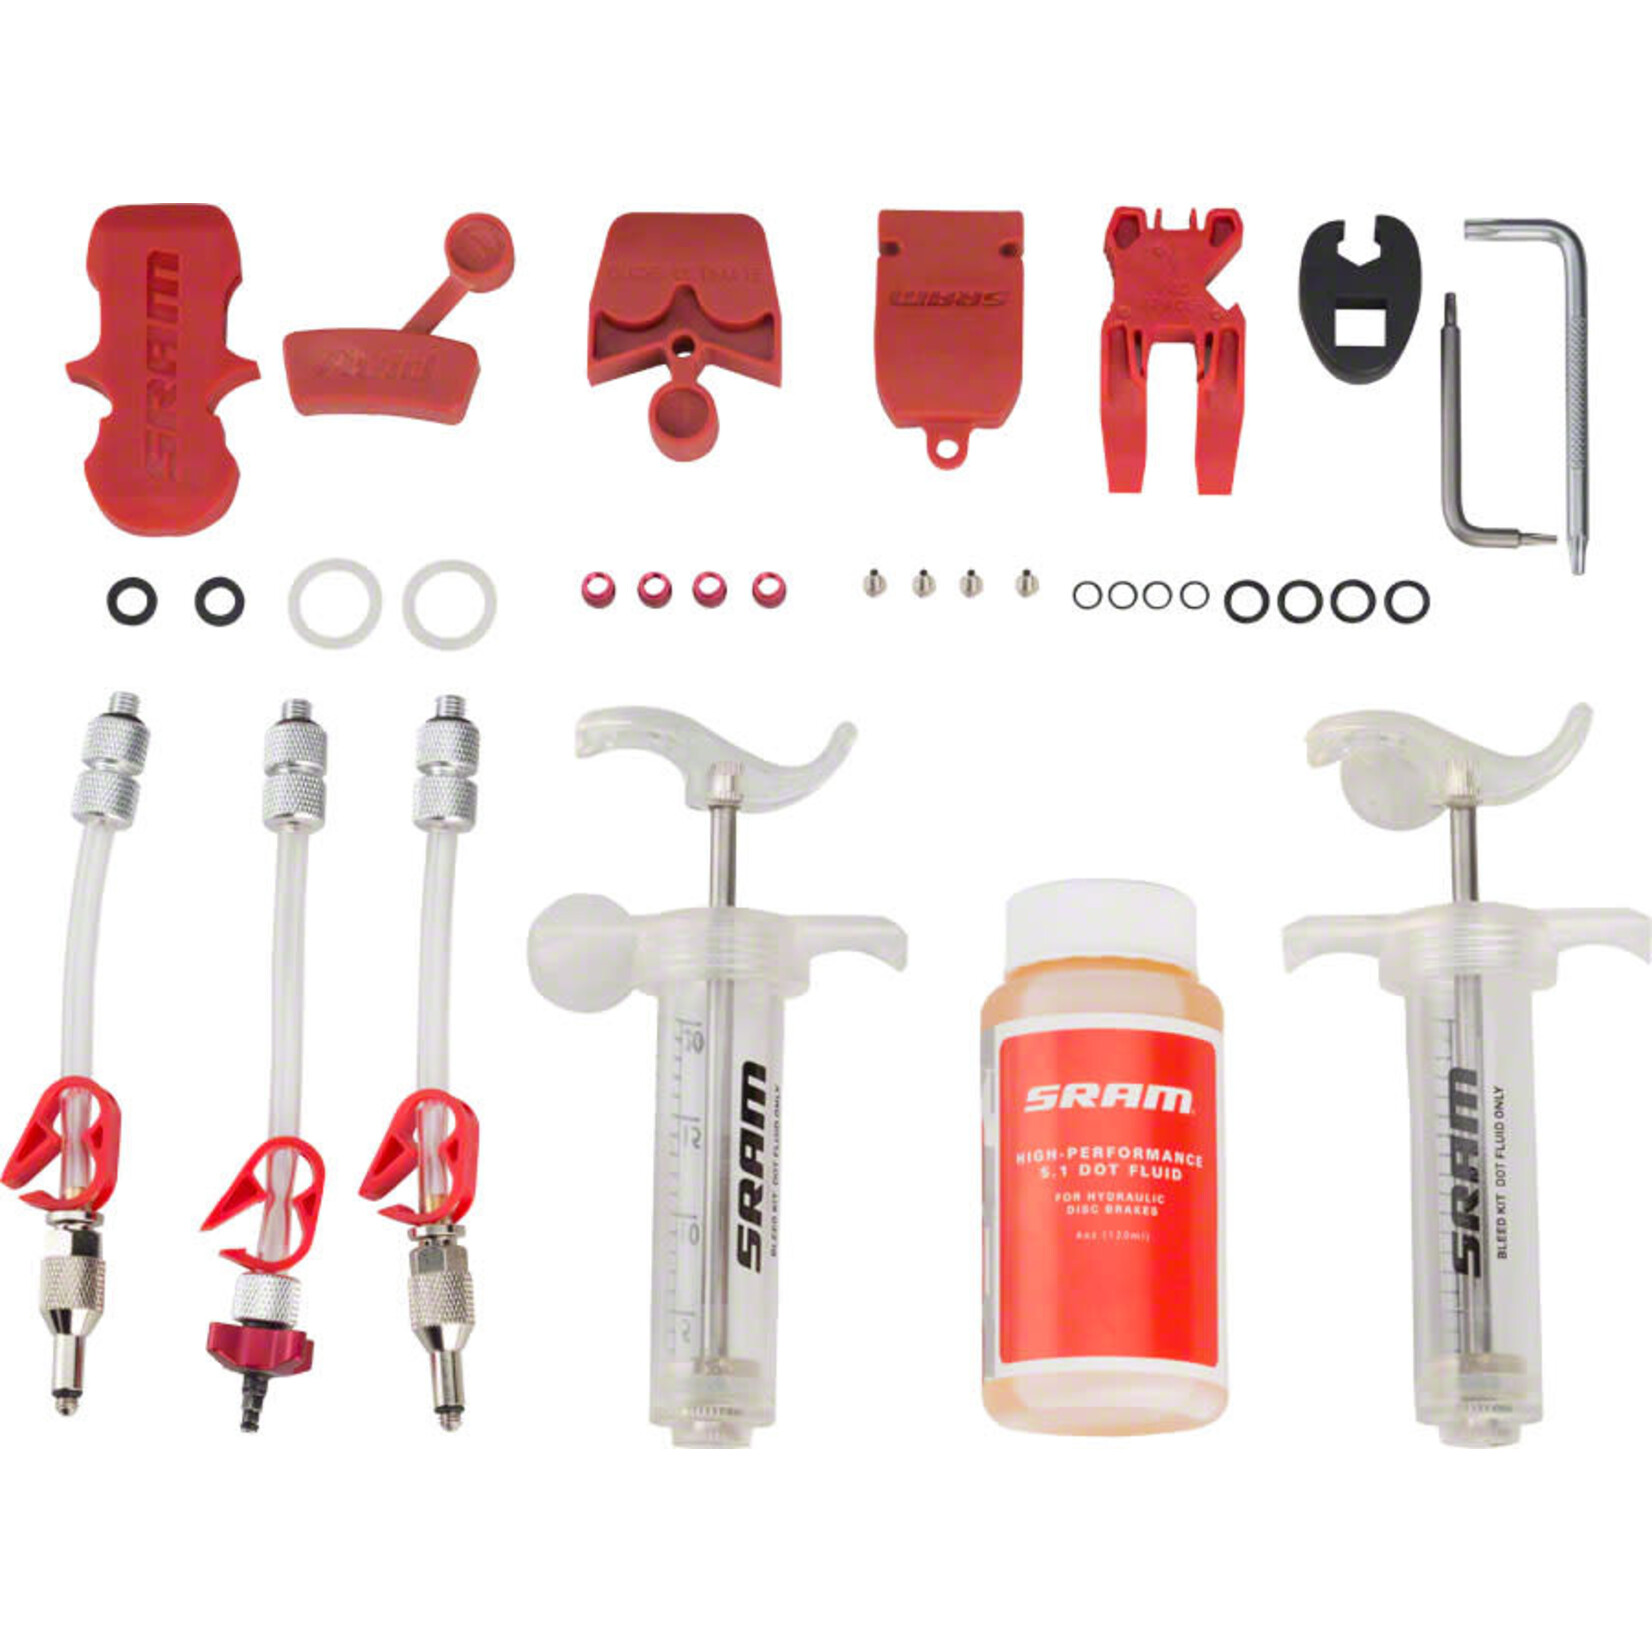 Sram Pro Disc Brake Bleed Kit - For SRAM X0, XX, Guide, Level, Code, HydroR, and G2, with DOT Fluid